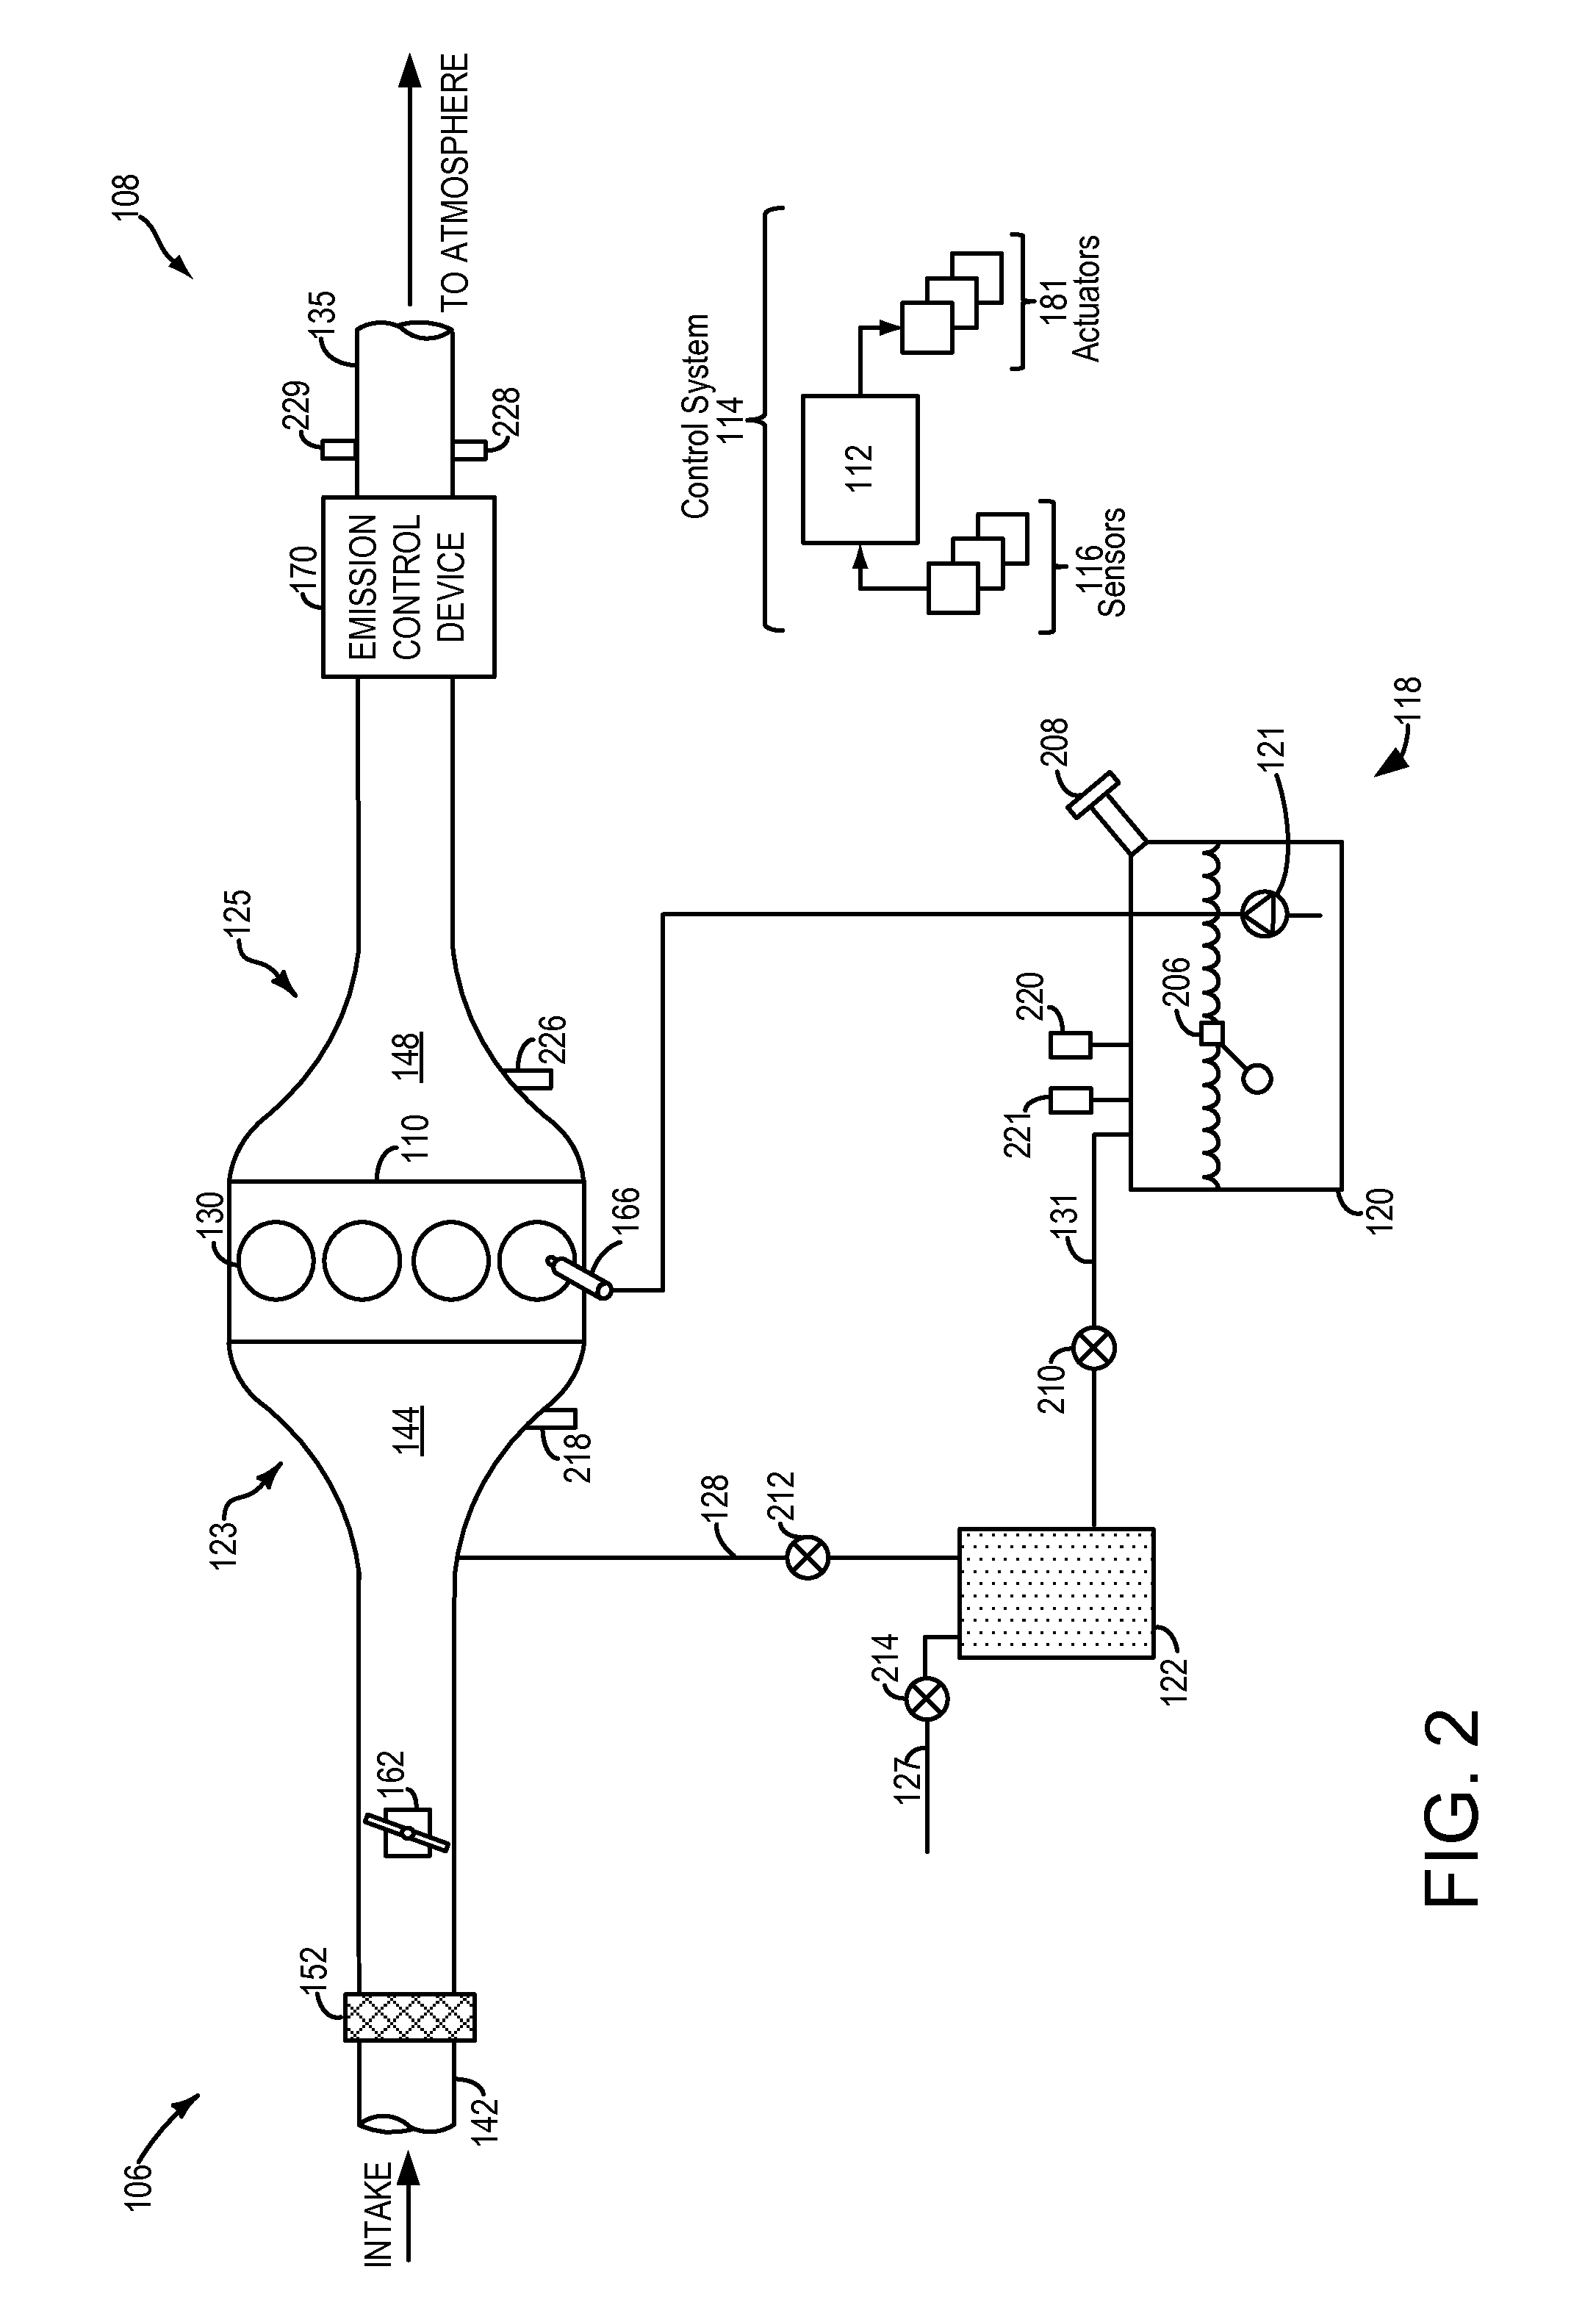 Systems and methods for evaporative emissions testing